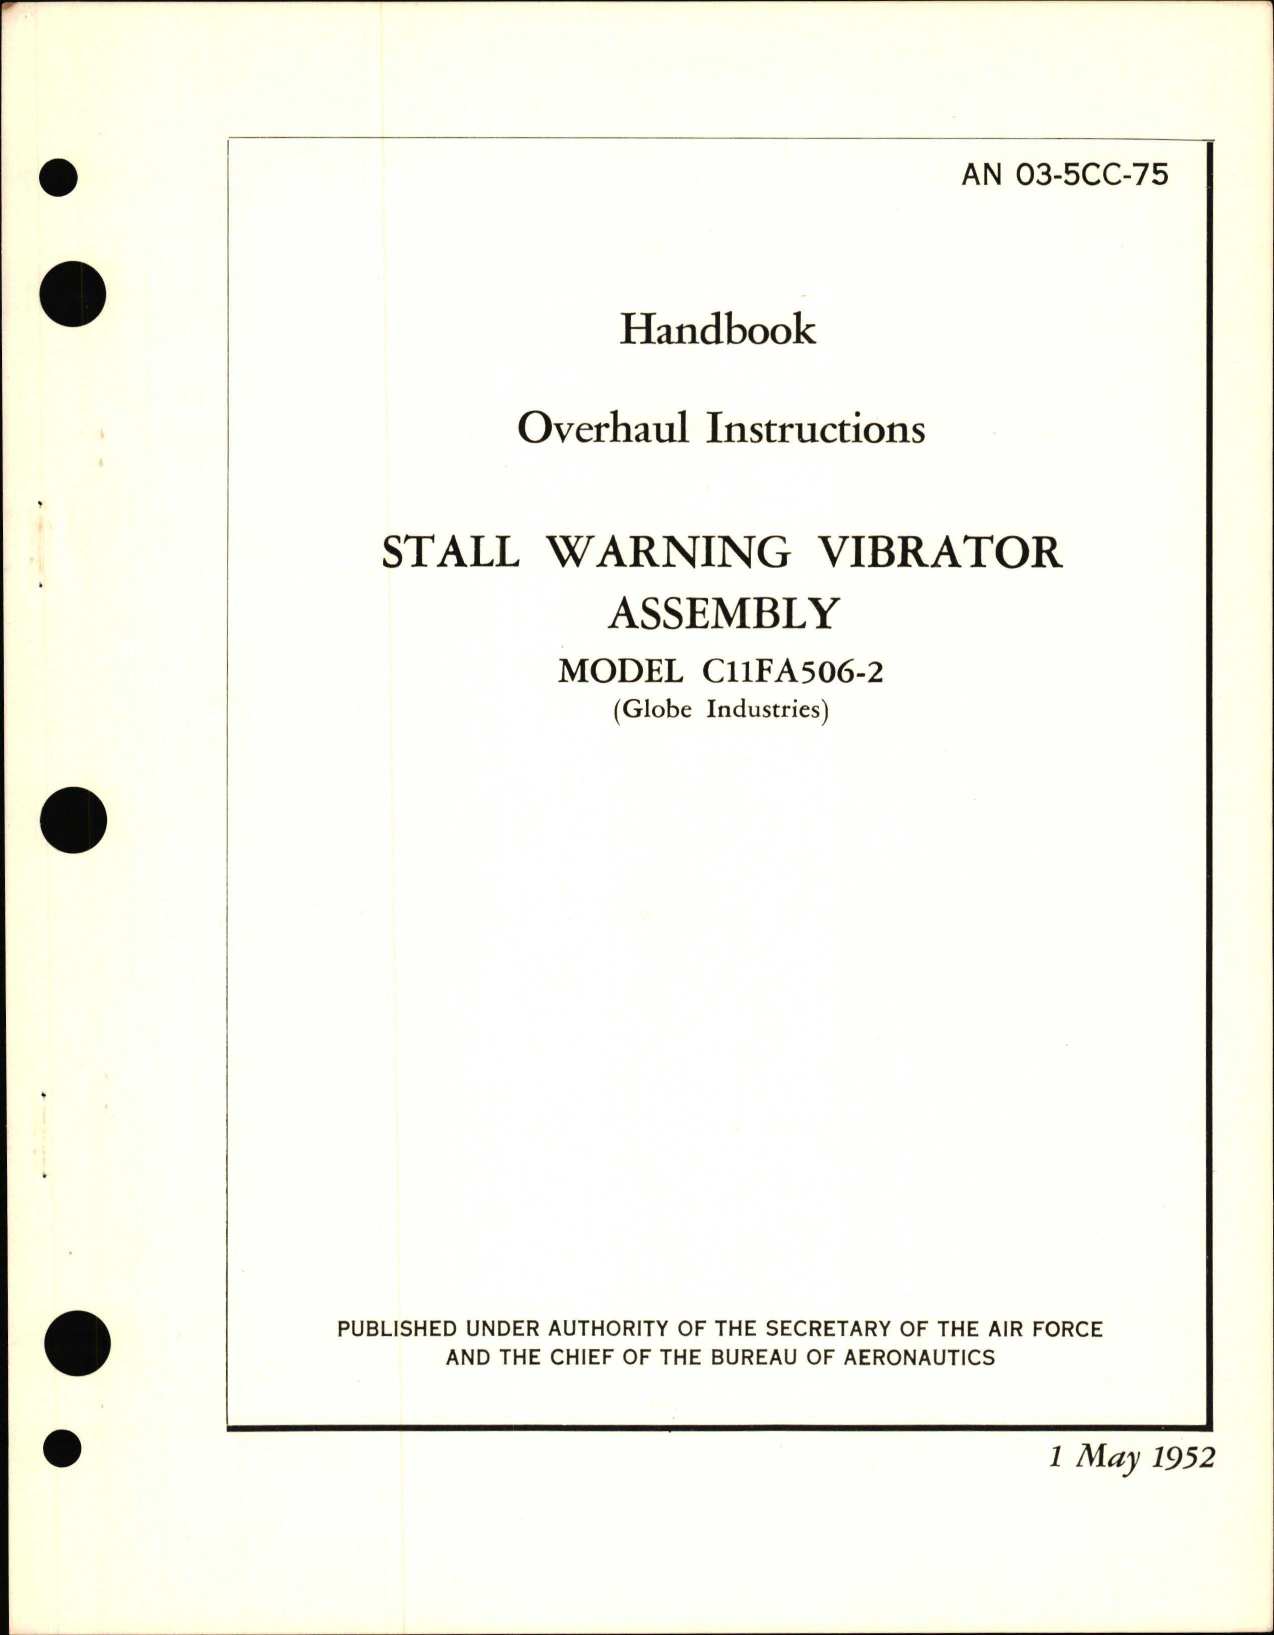 Sample page 1 from AirCorps Library document: Overhaul Instructions for Stall Warning Vibrator Assembly Model C11FA506-2 